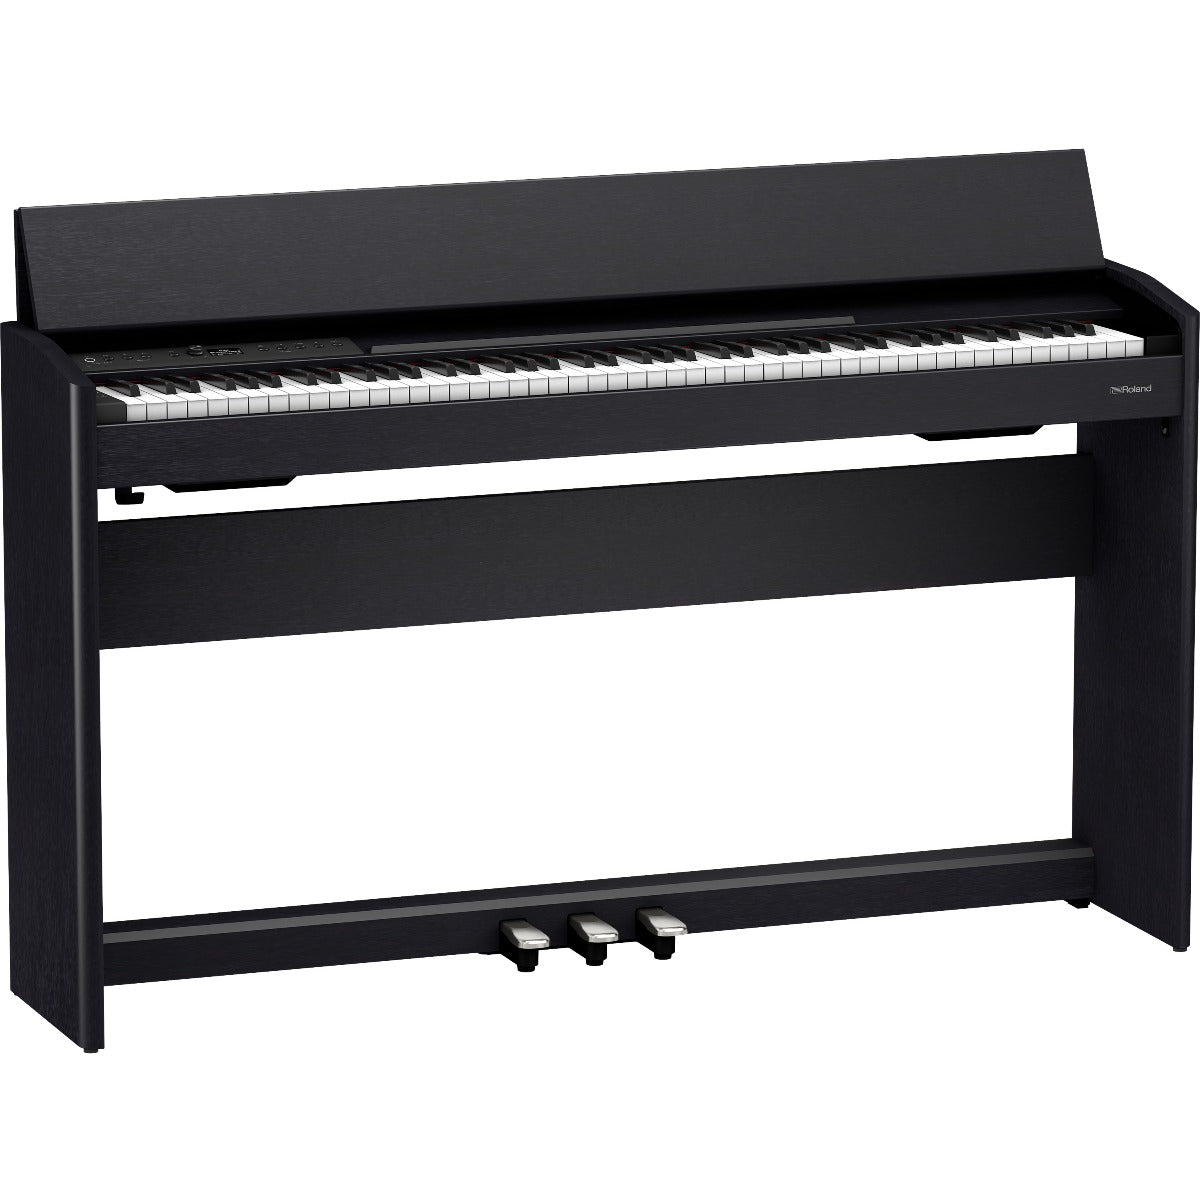 3/4 view of Roland F701 Digital Piano - Contemporary Black with key cover open showing front, top and left side